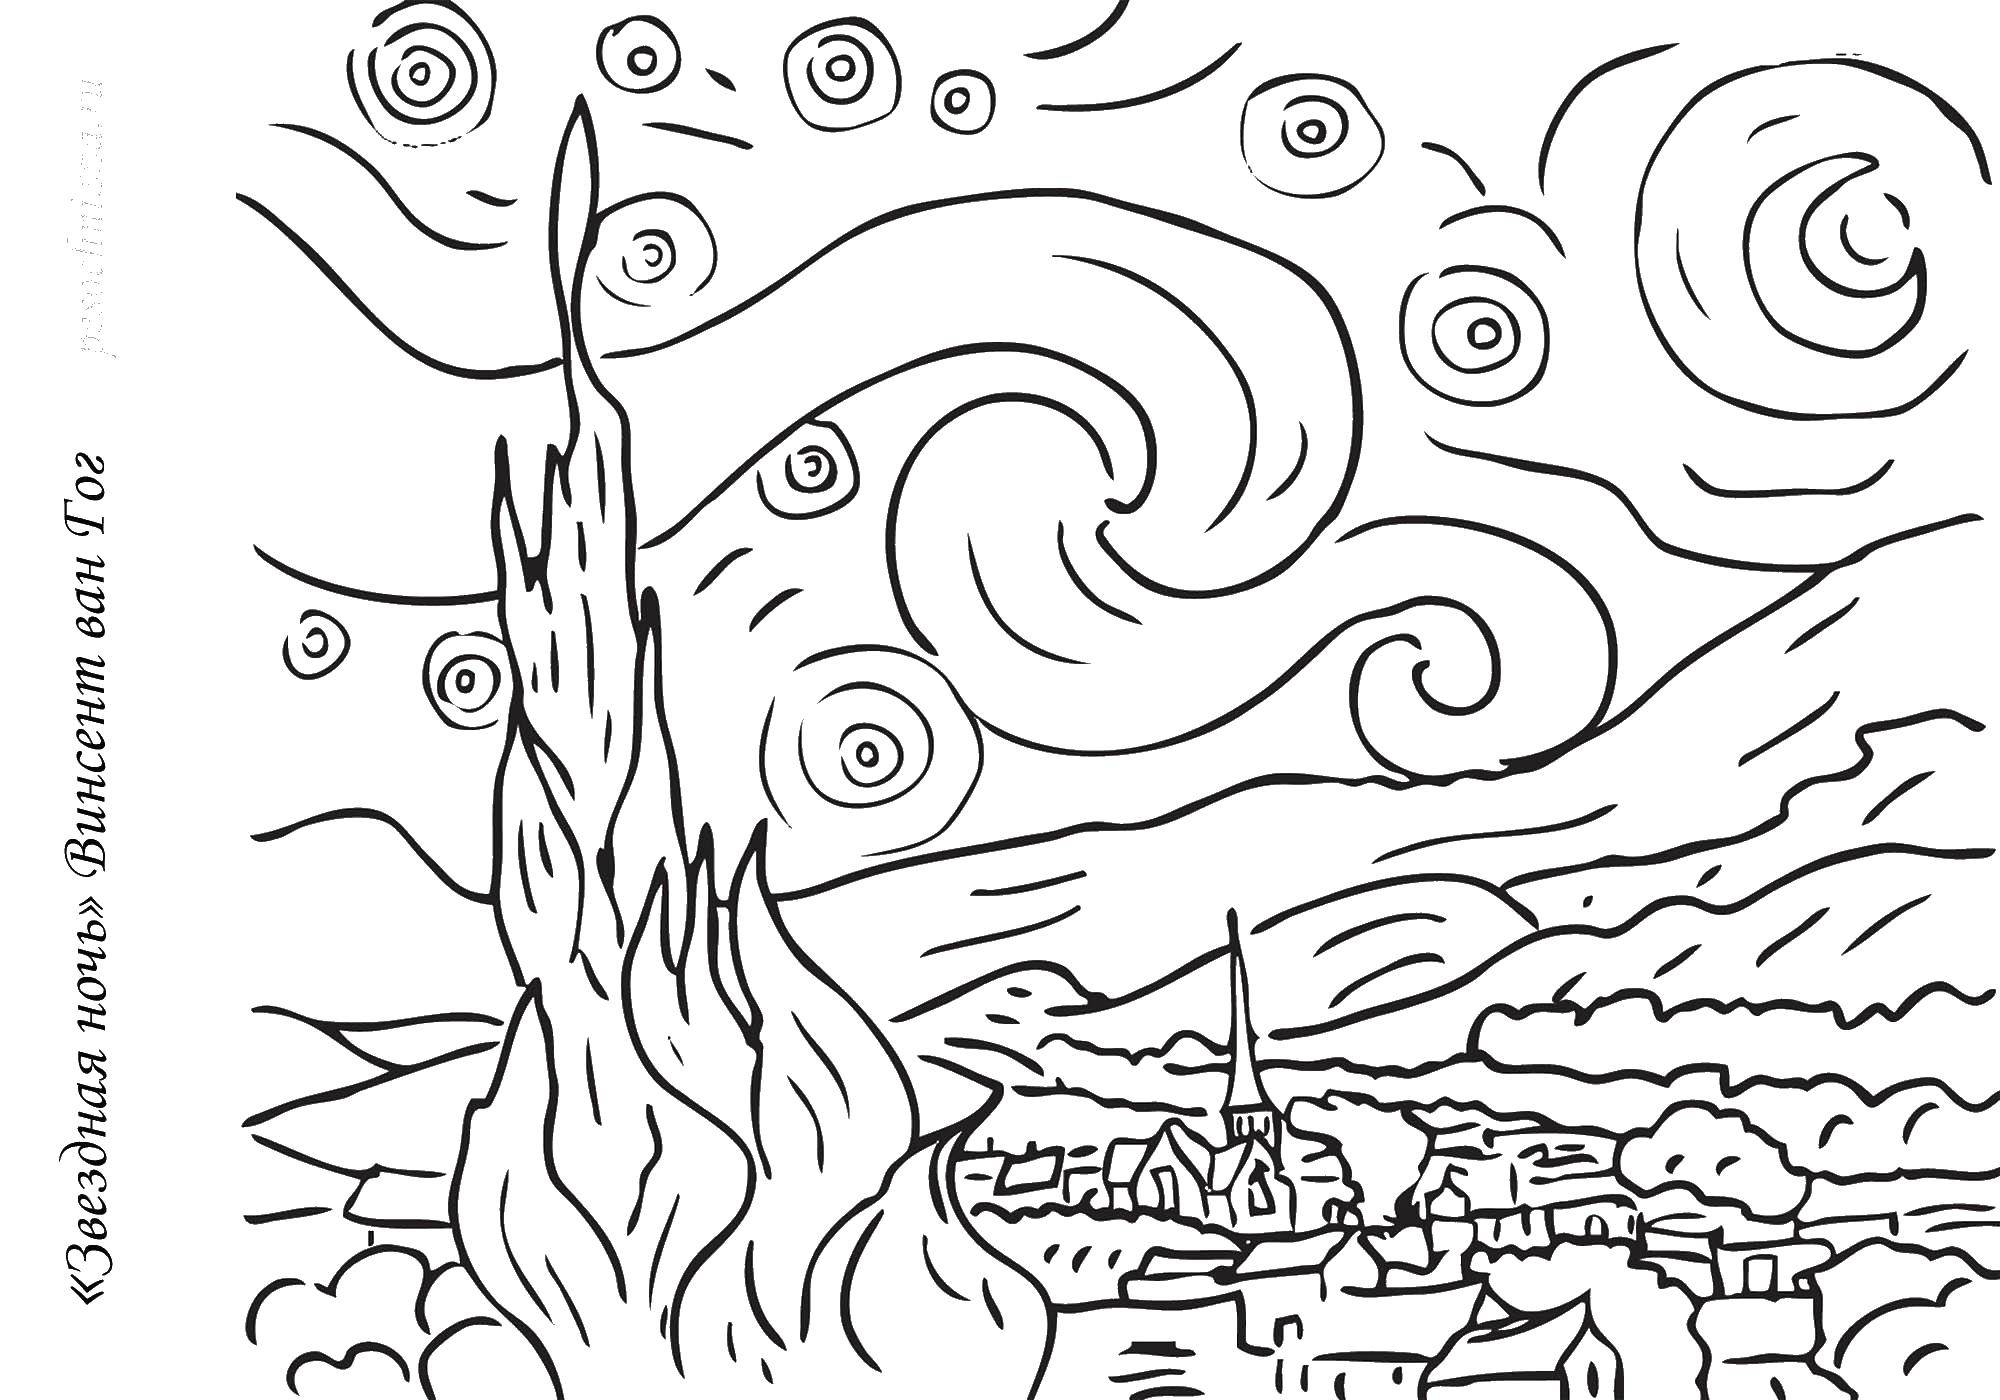 Coloring Van Gogh painting. Category The picture. Tags:  The picture.